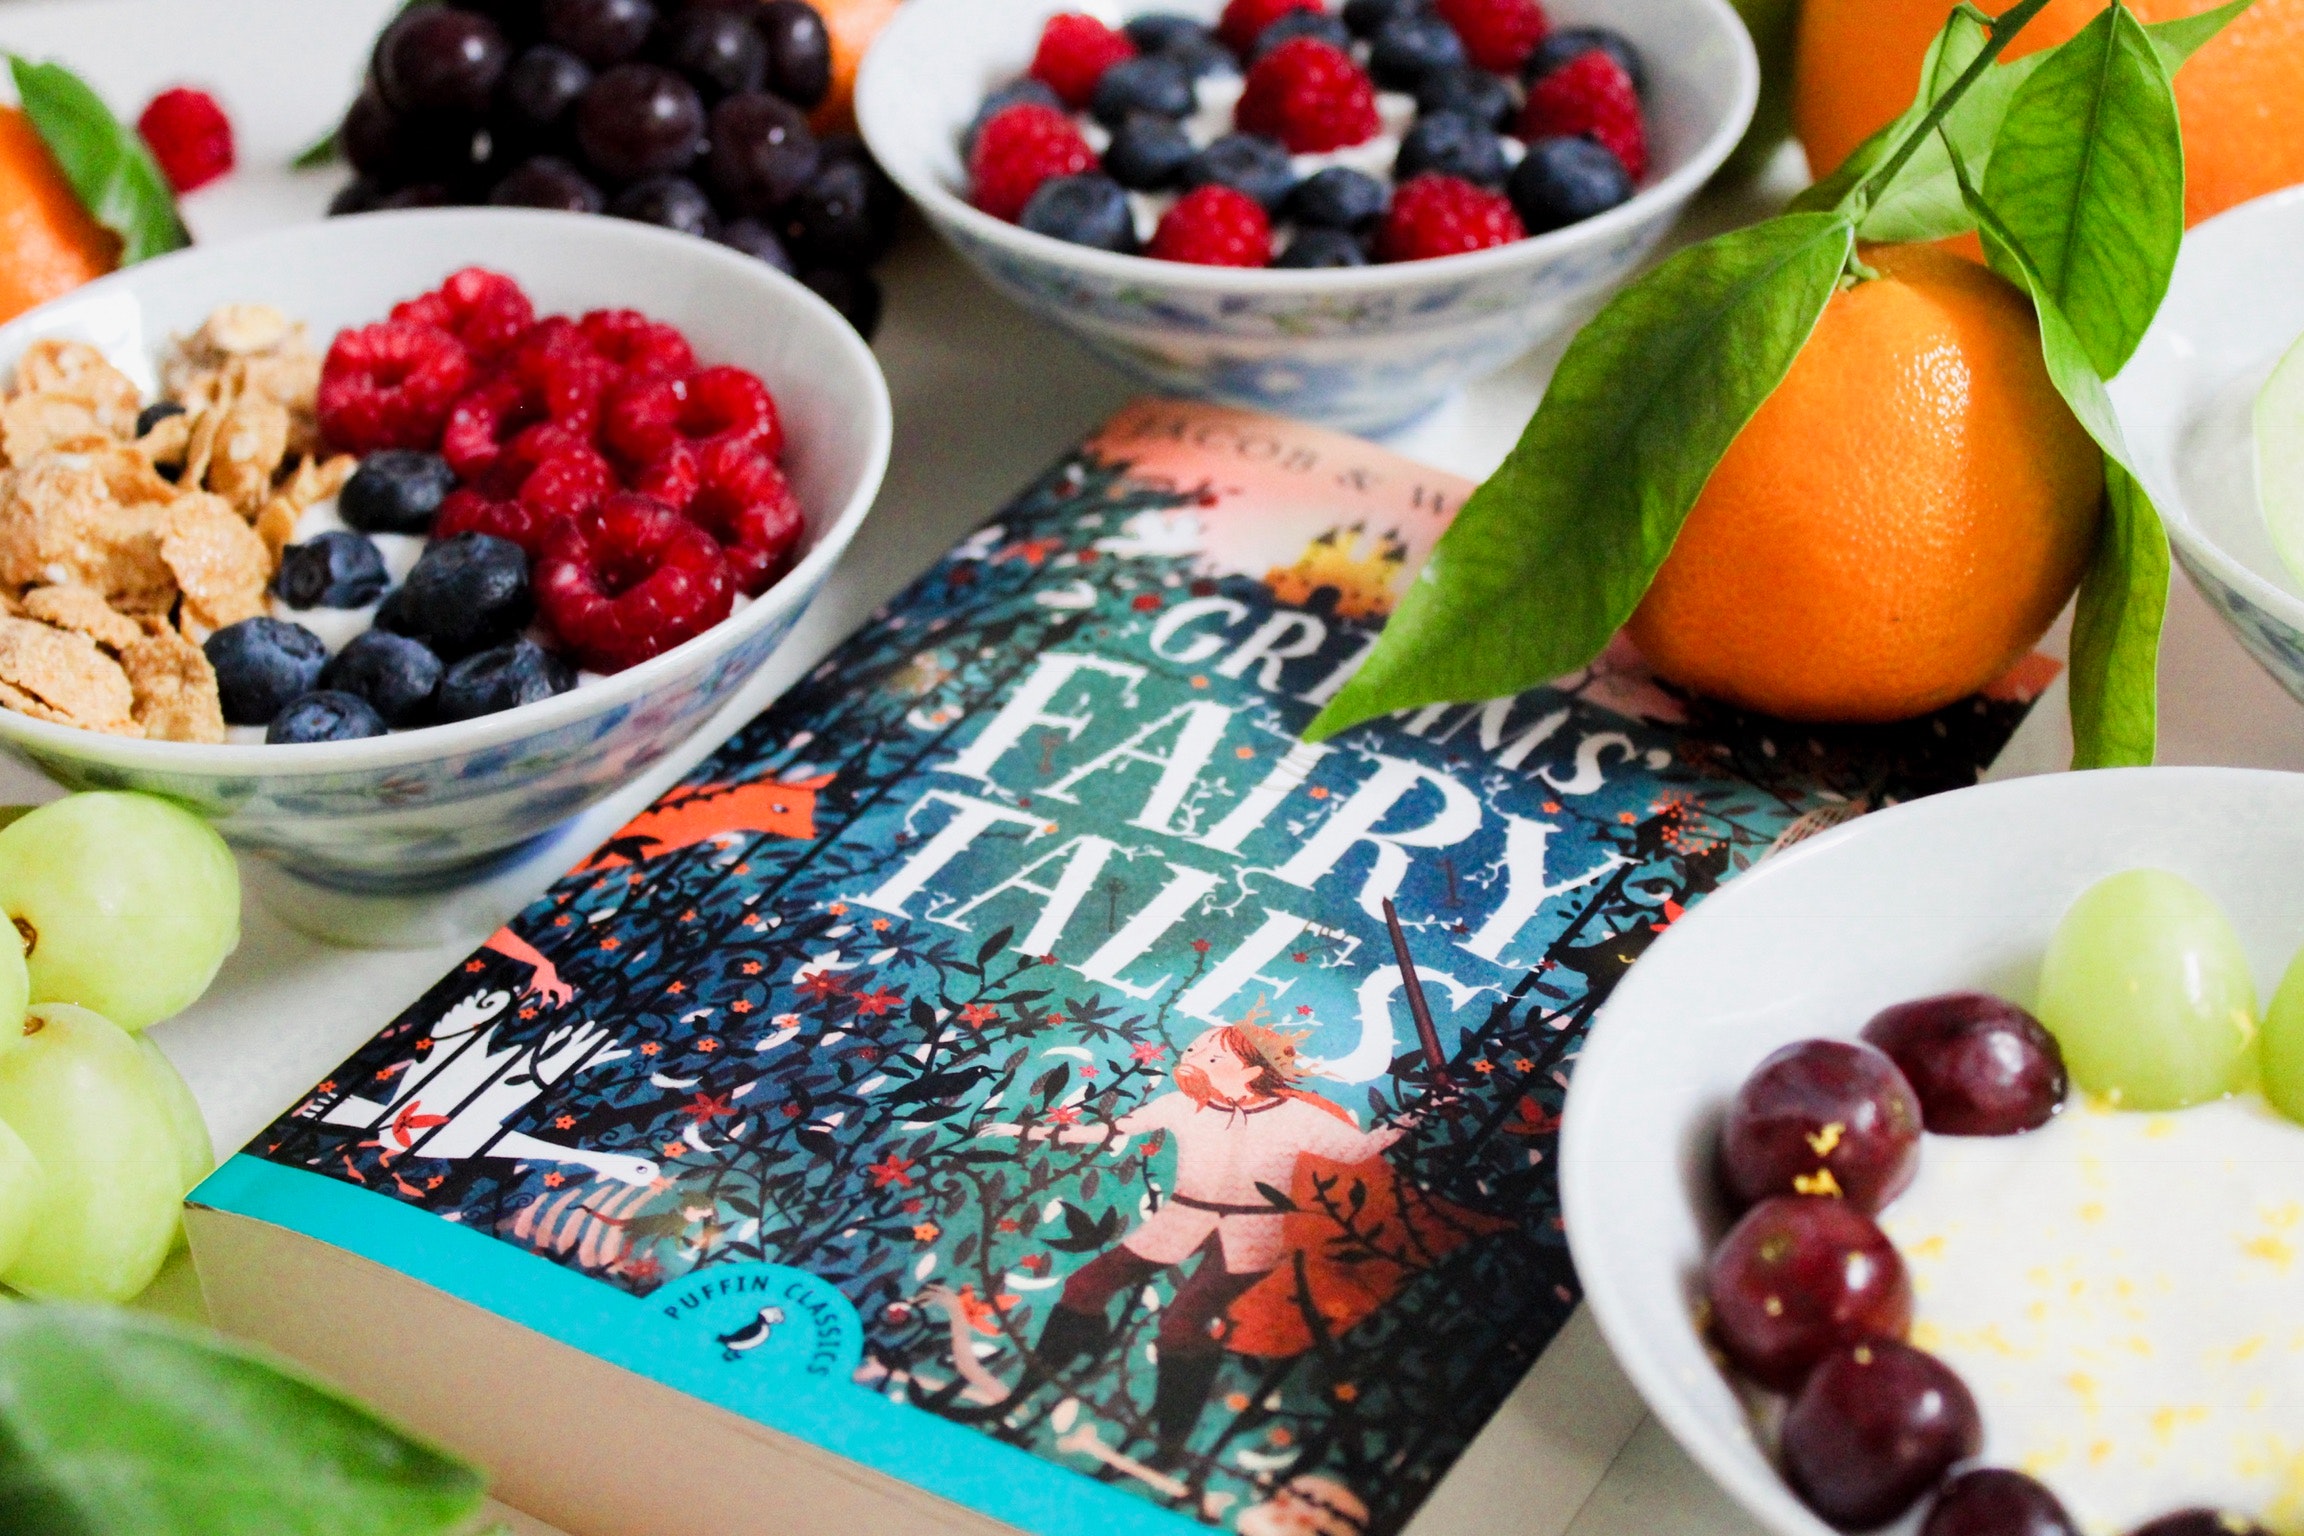 Grimm' Fairy Tales surrounded by fruit